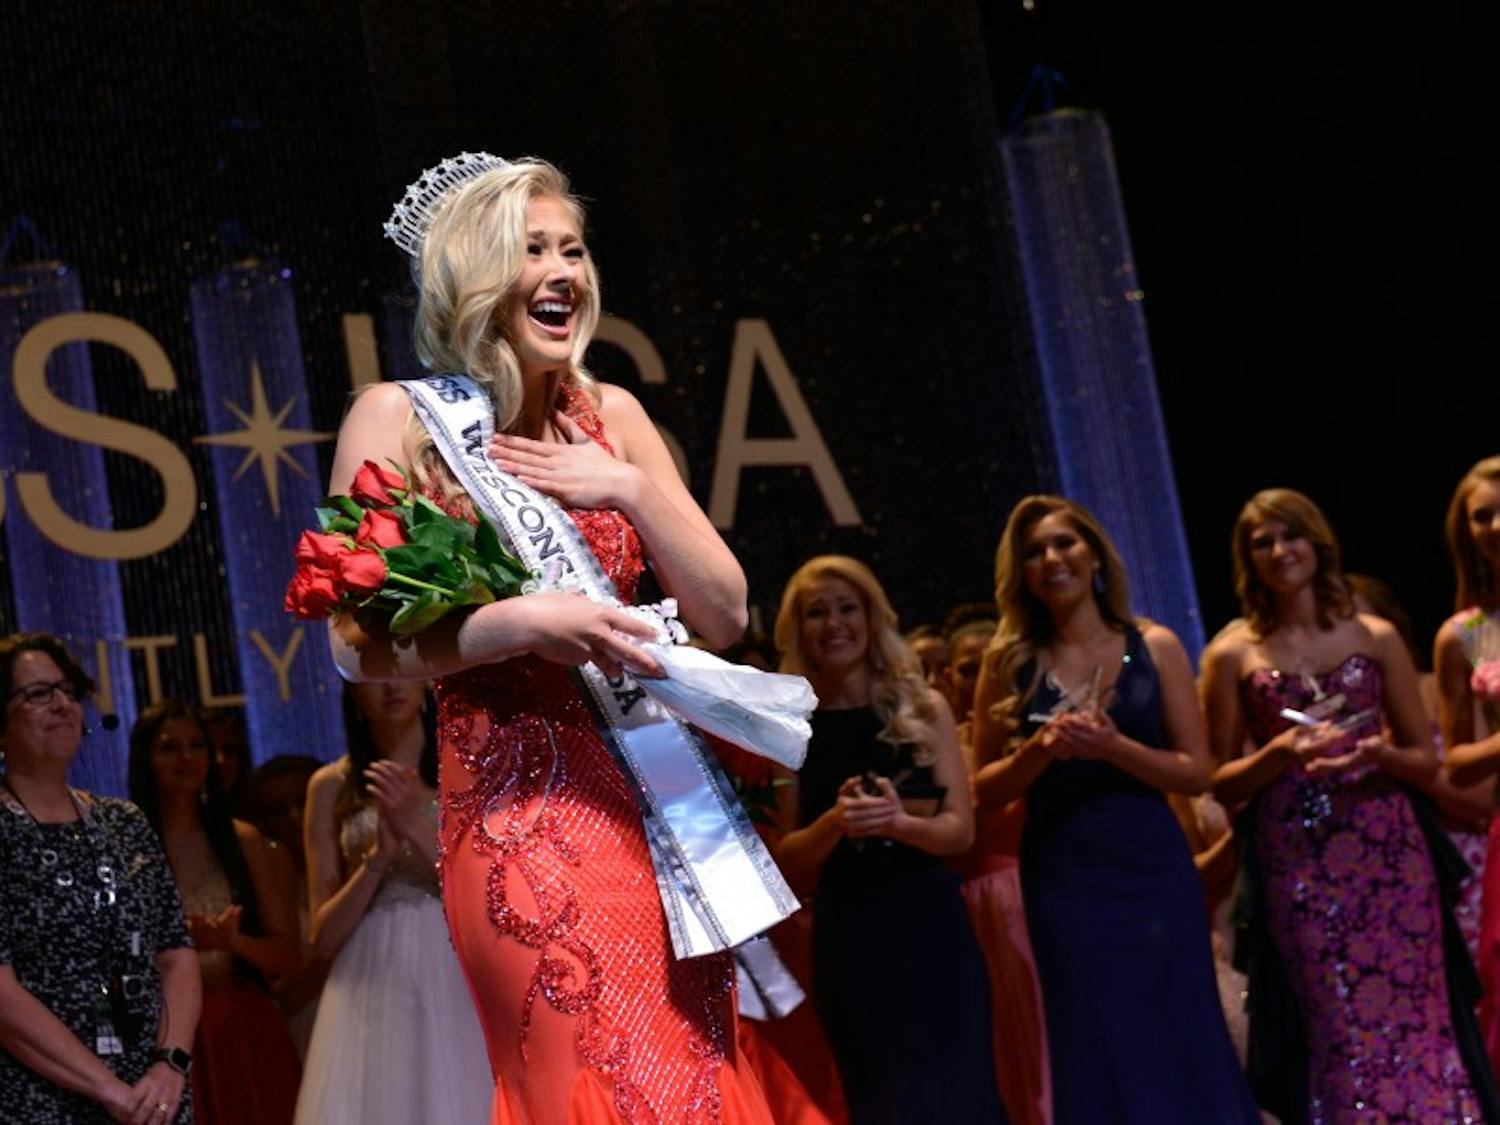 UW-Madison sophomore Skylar Witte won the title of Miss Wisconsin USA 2017 earlier this month and plans to visit middle schools and inspire students during her reign.